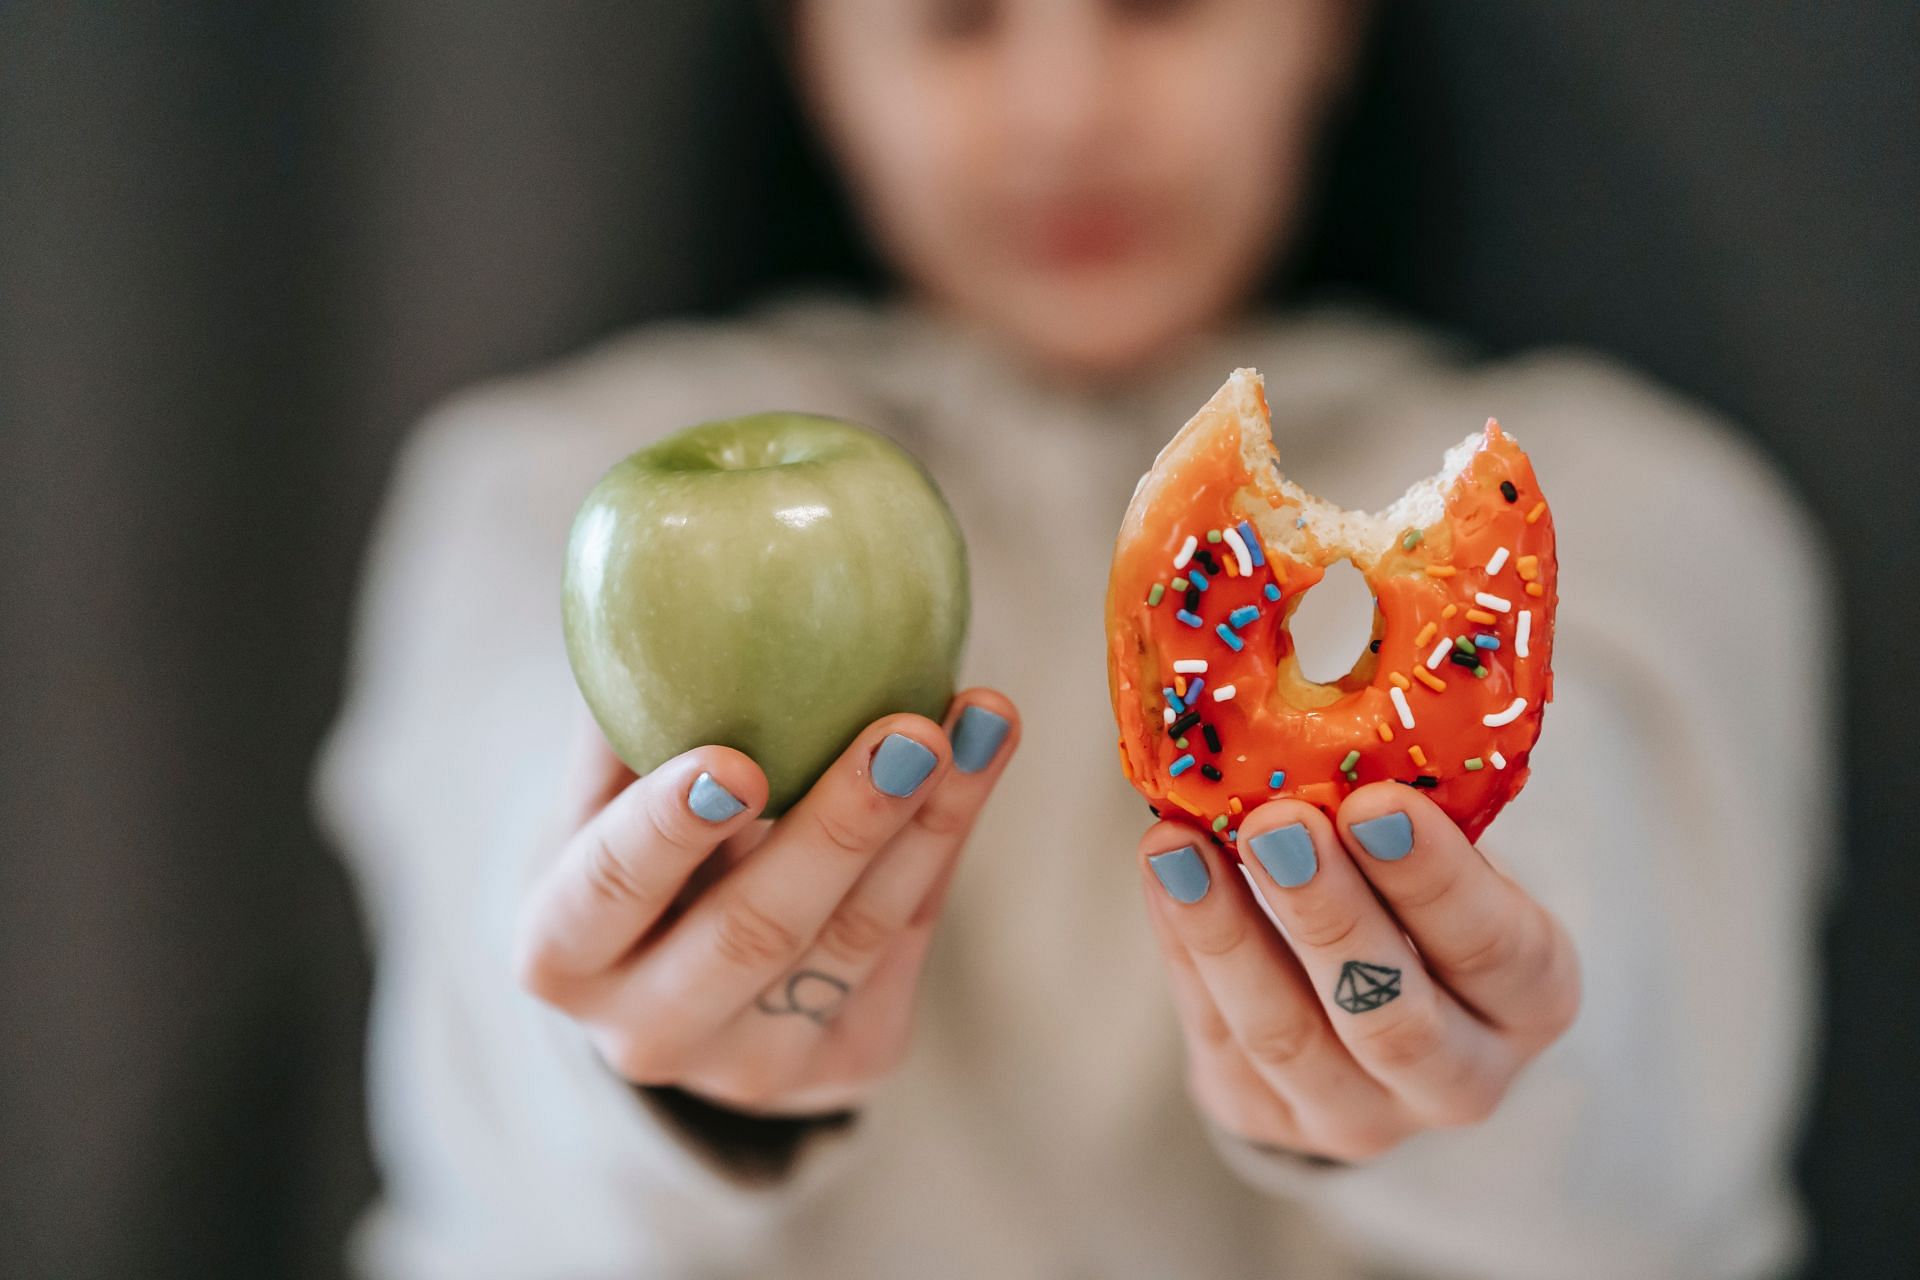 Eating a balanced diet can help to improve you gut. (Image via Pexels / Andres Ayrton)